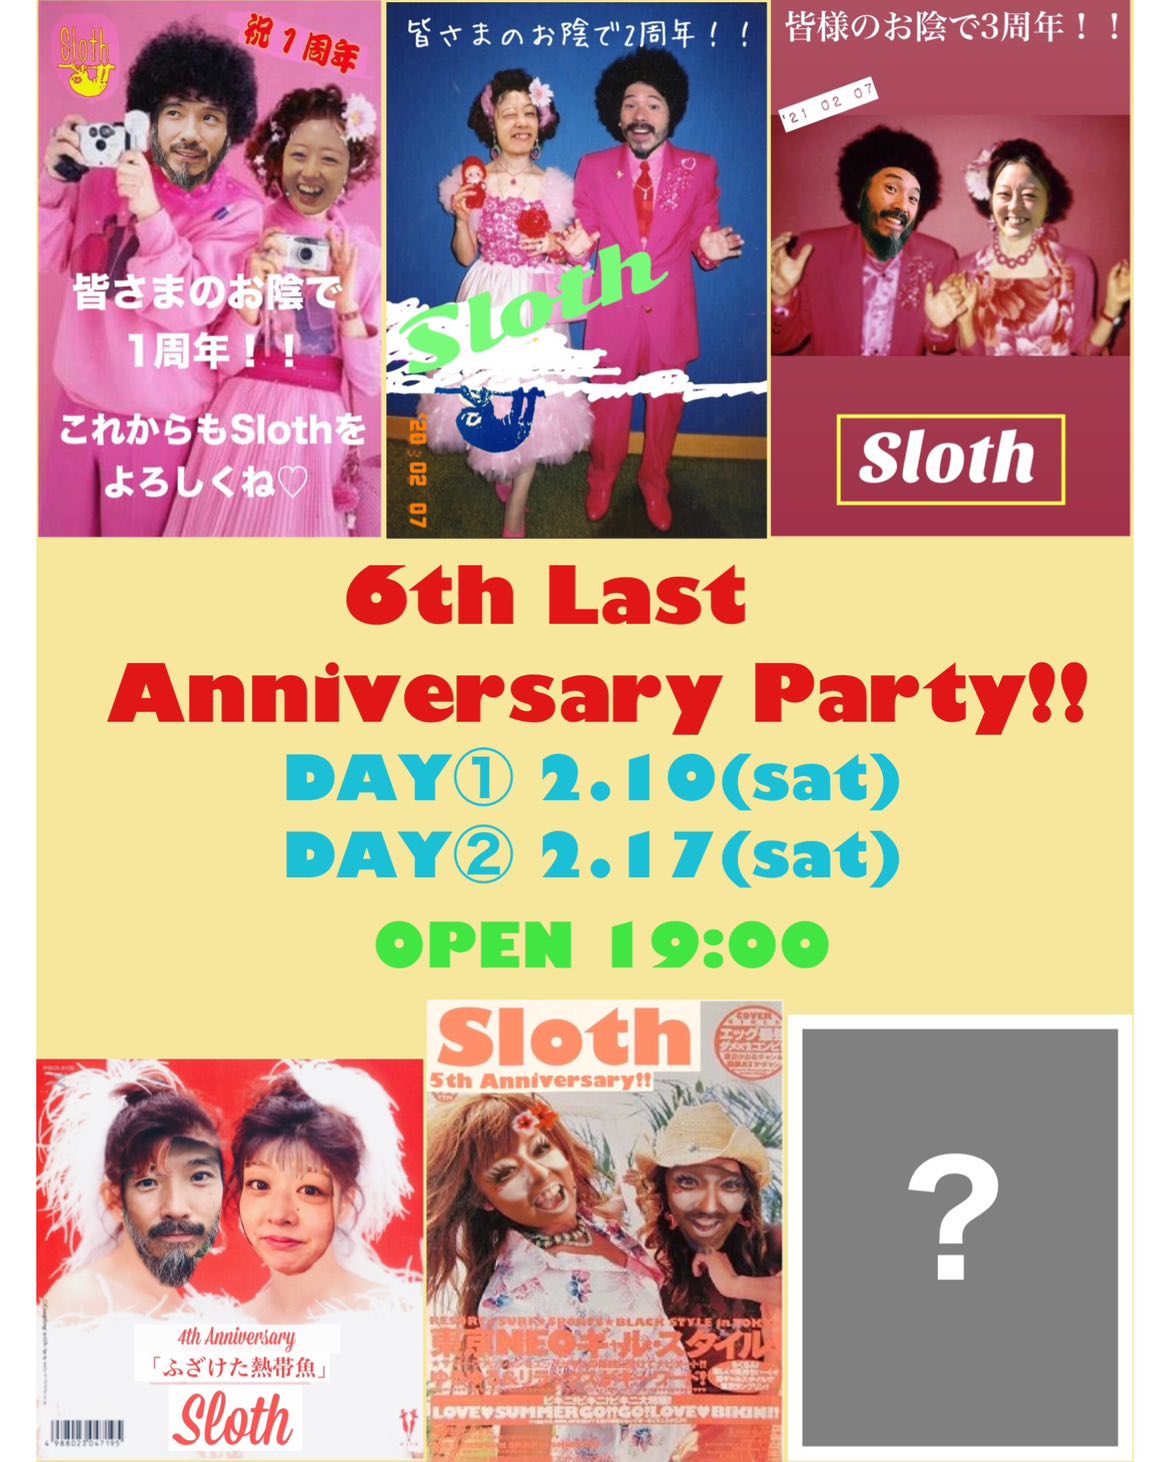 【Sloth 6th Anniversary party DAY２】  ■ 2/17(sat)